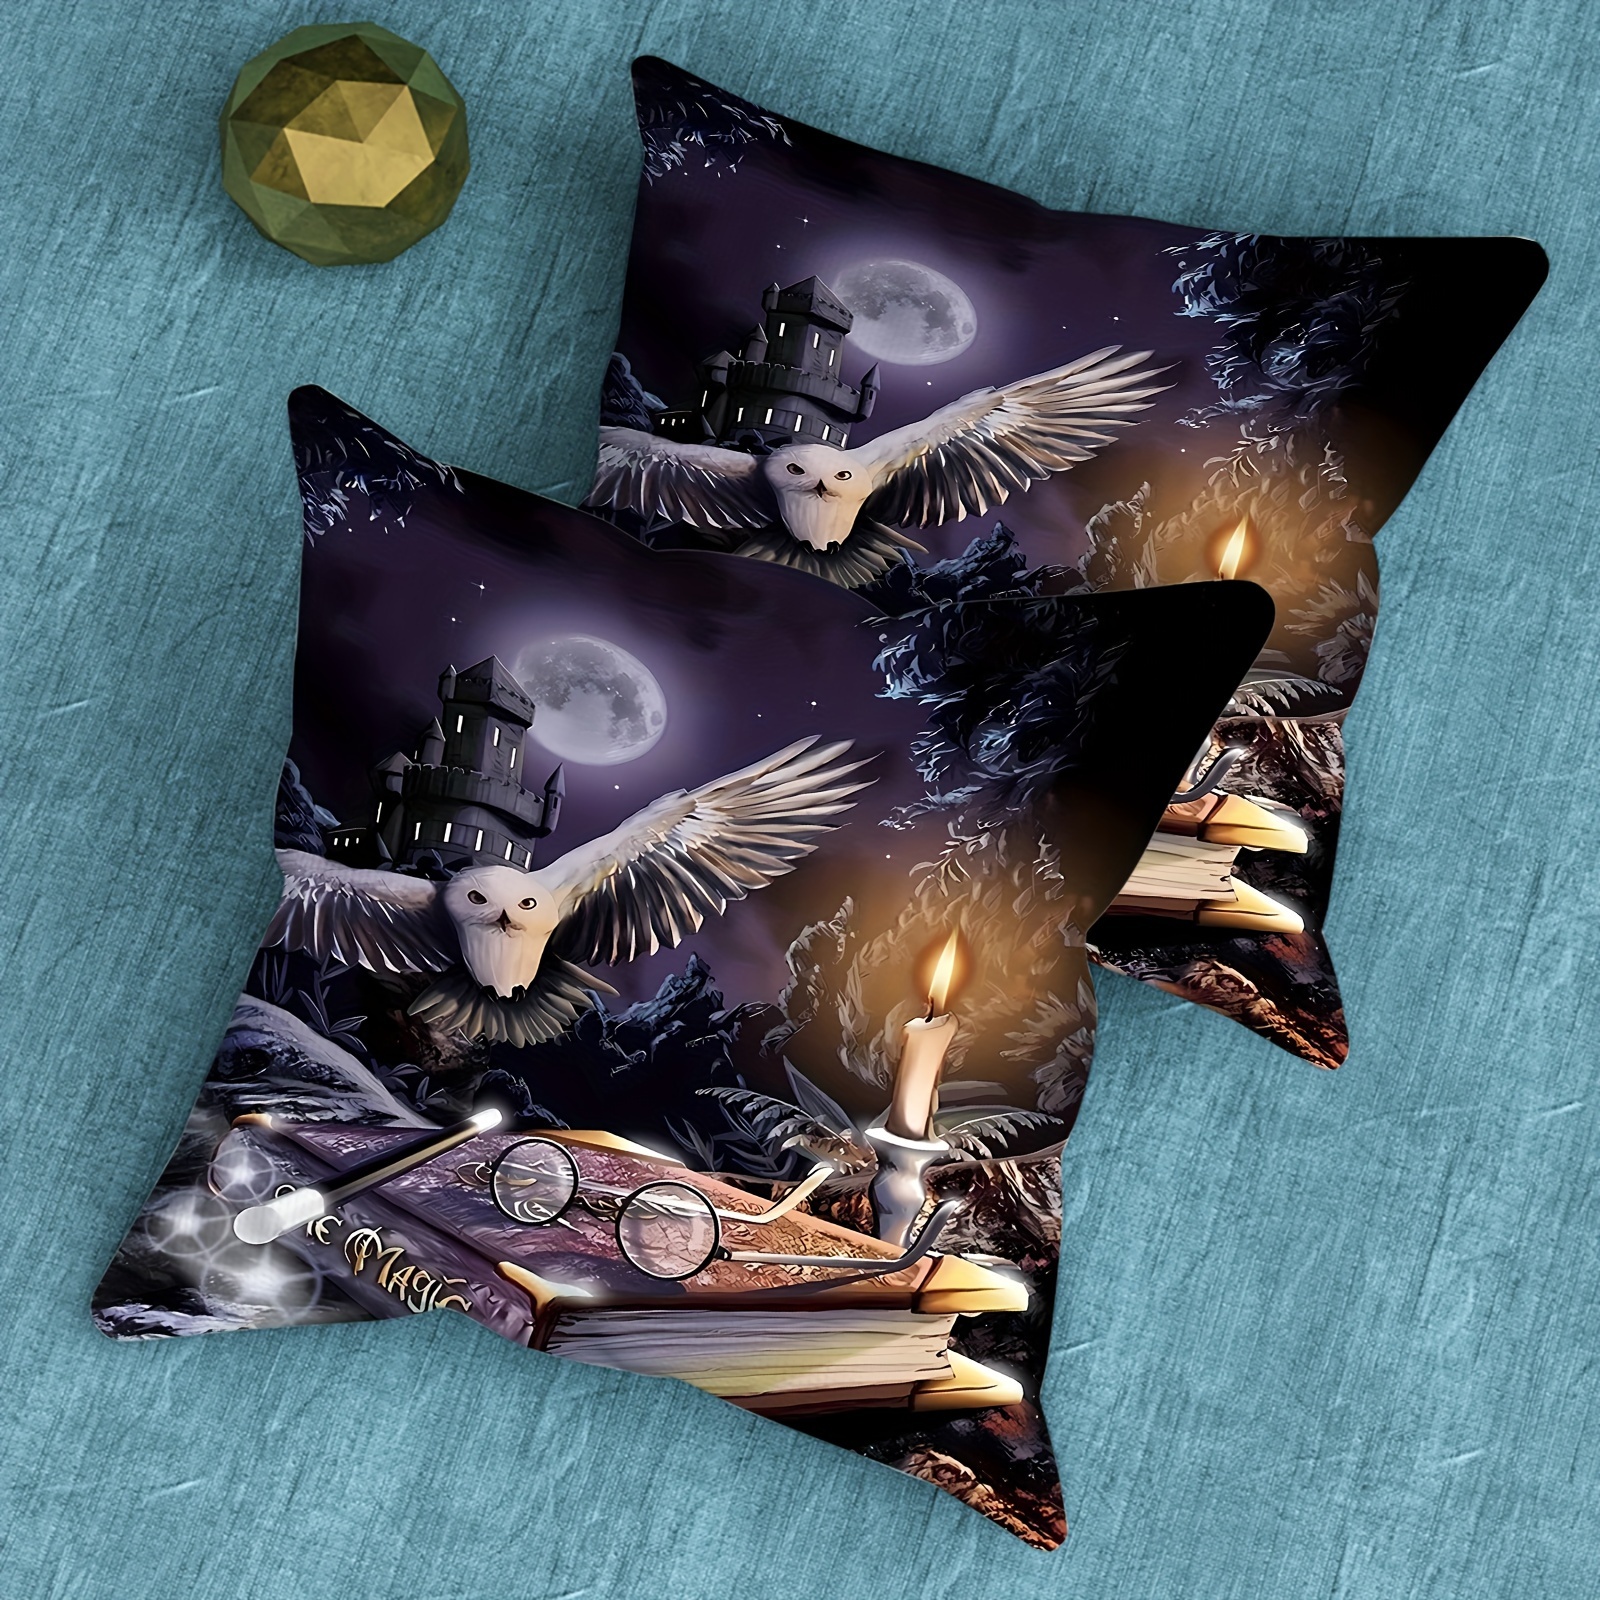 

2-piece Owl Castle Moon Plush Throw Pillow Covers, 18x18 Inches - Zippered, Machine Washable, Soft Microfiber For Sofa & Bedroom Decor